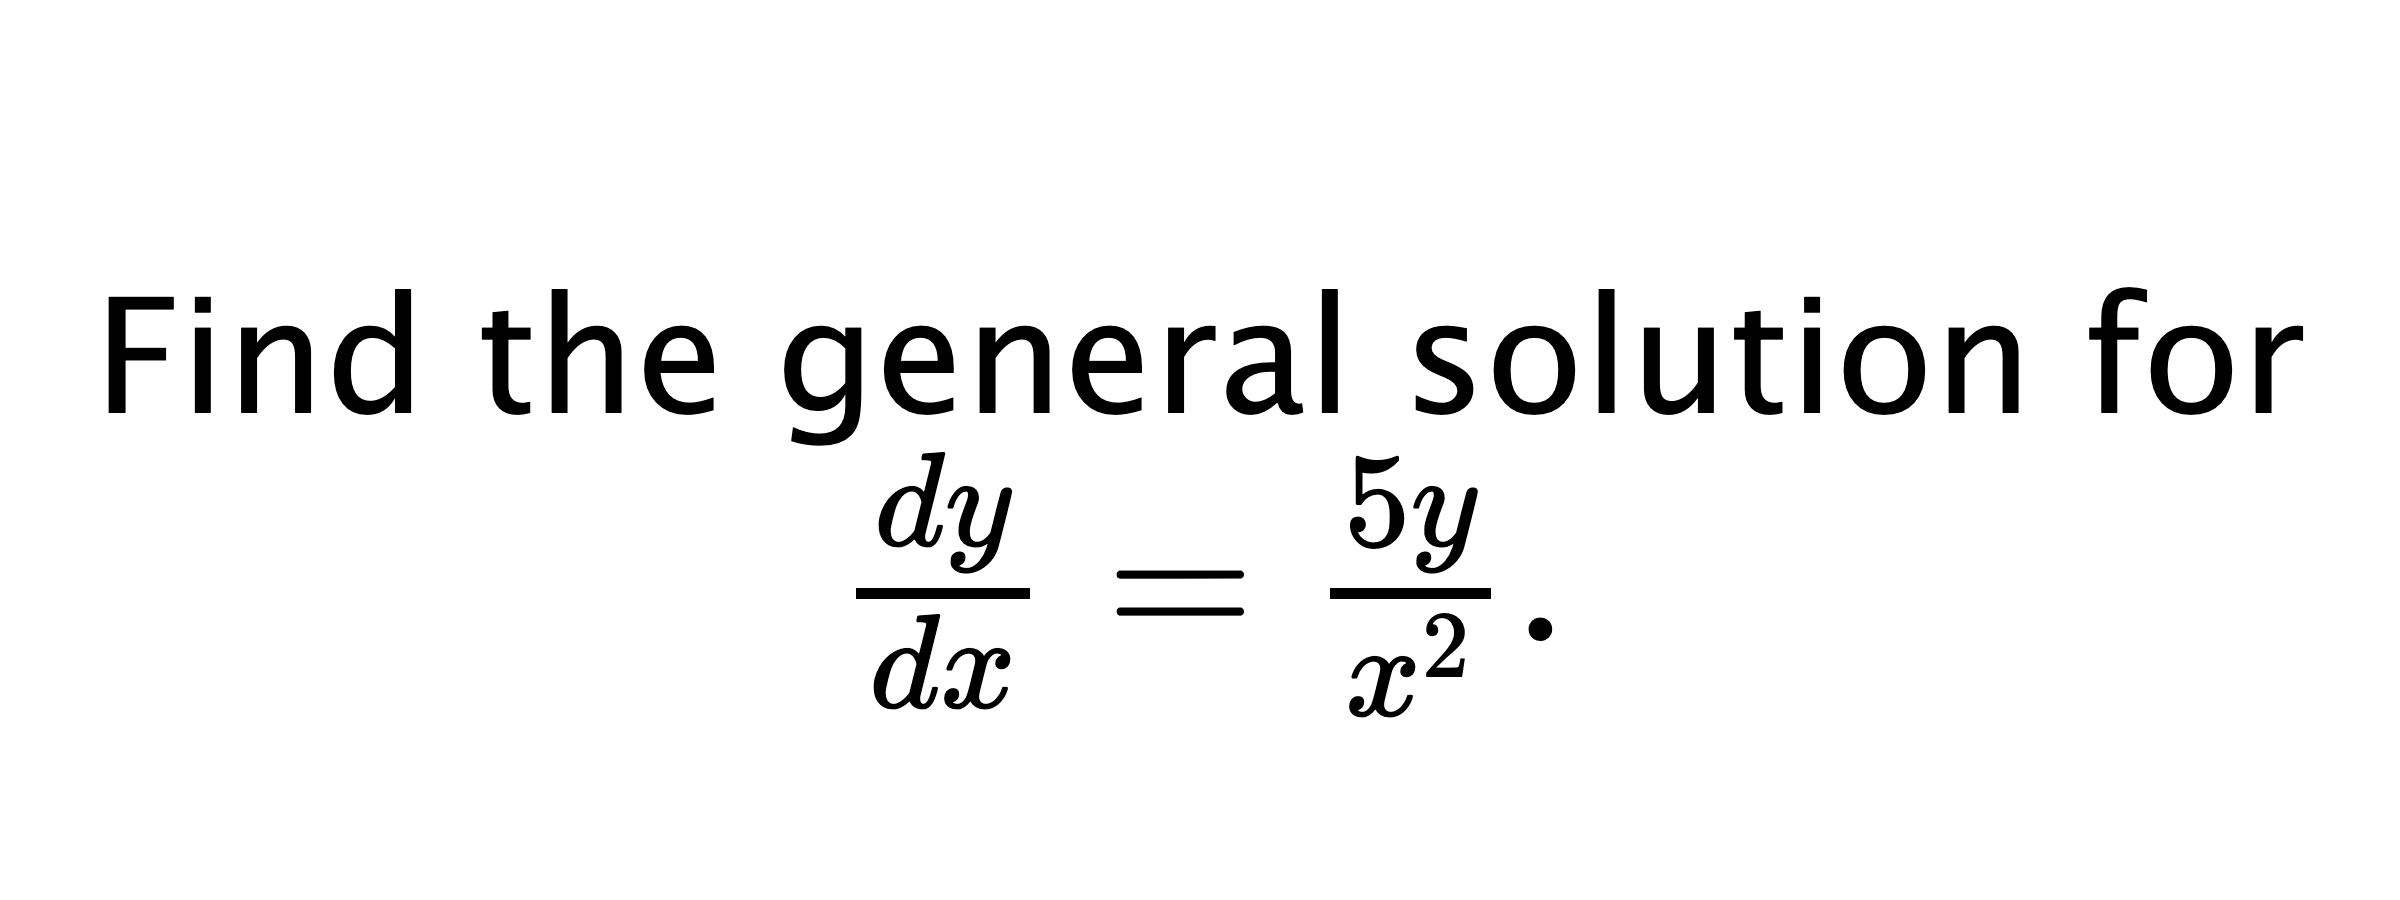  Find the general solution for $ \frac{dy}{dx}=\frac{5y}{x^{2}}. $